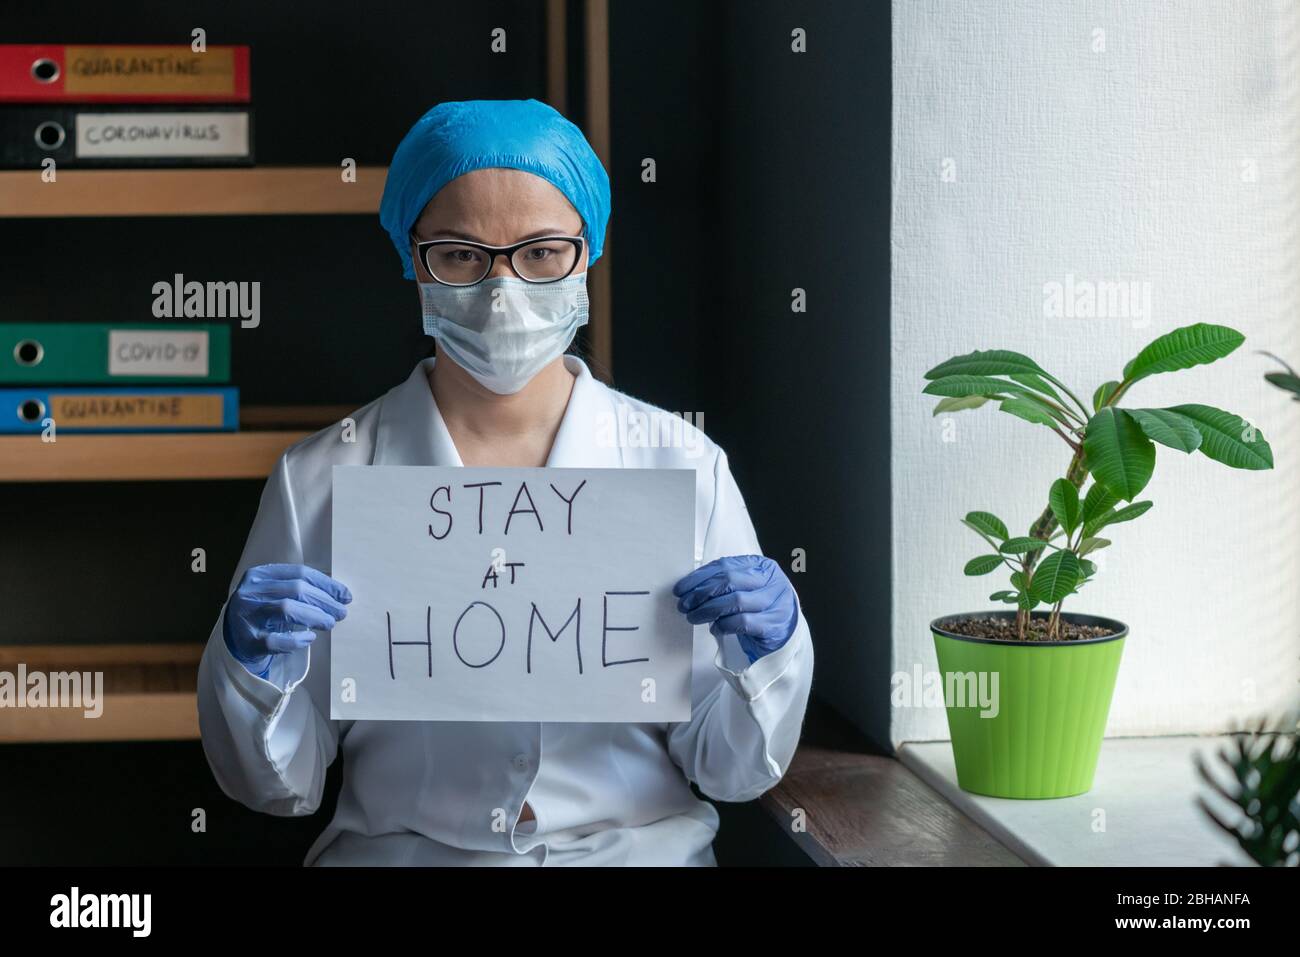 Stay At Home Sign From Female Doctor Stock Photo